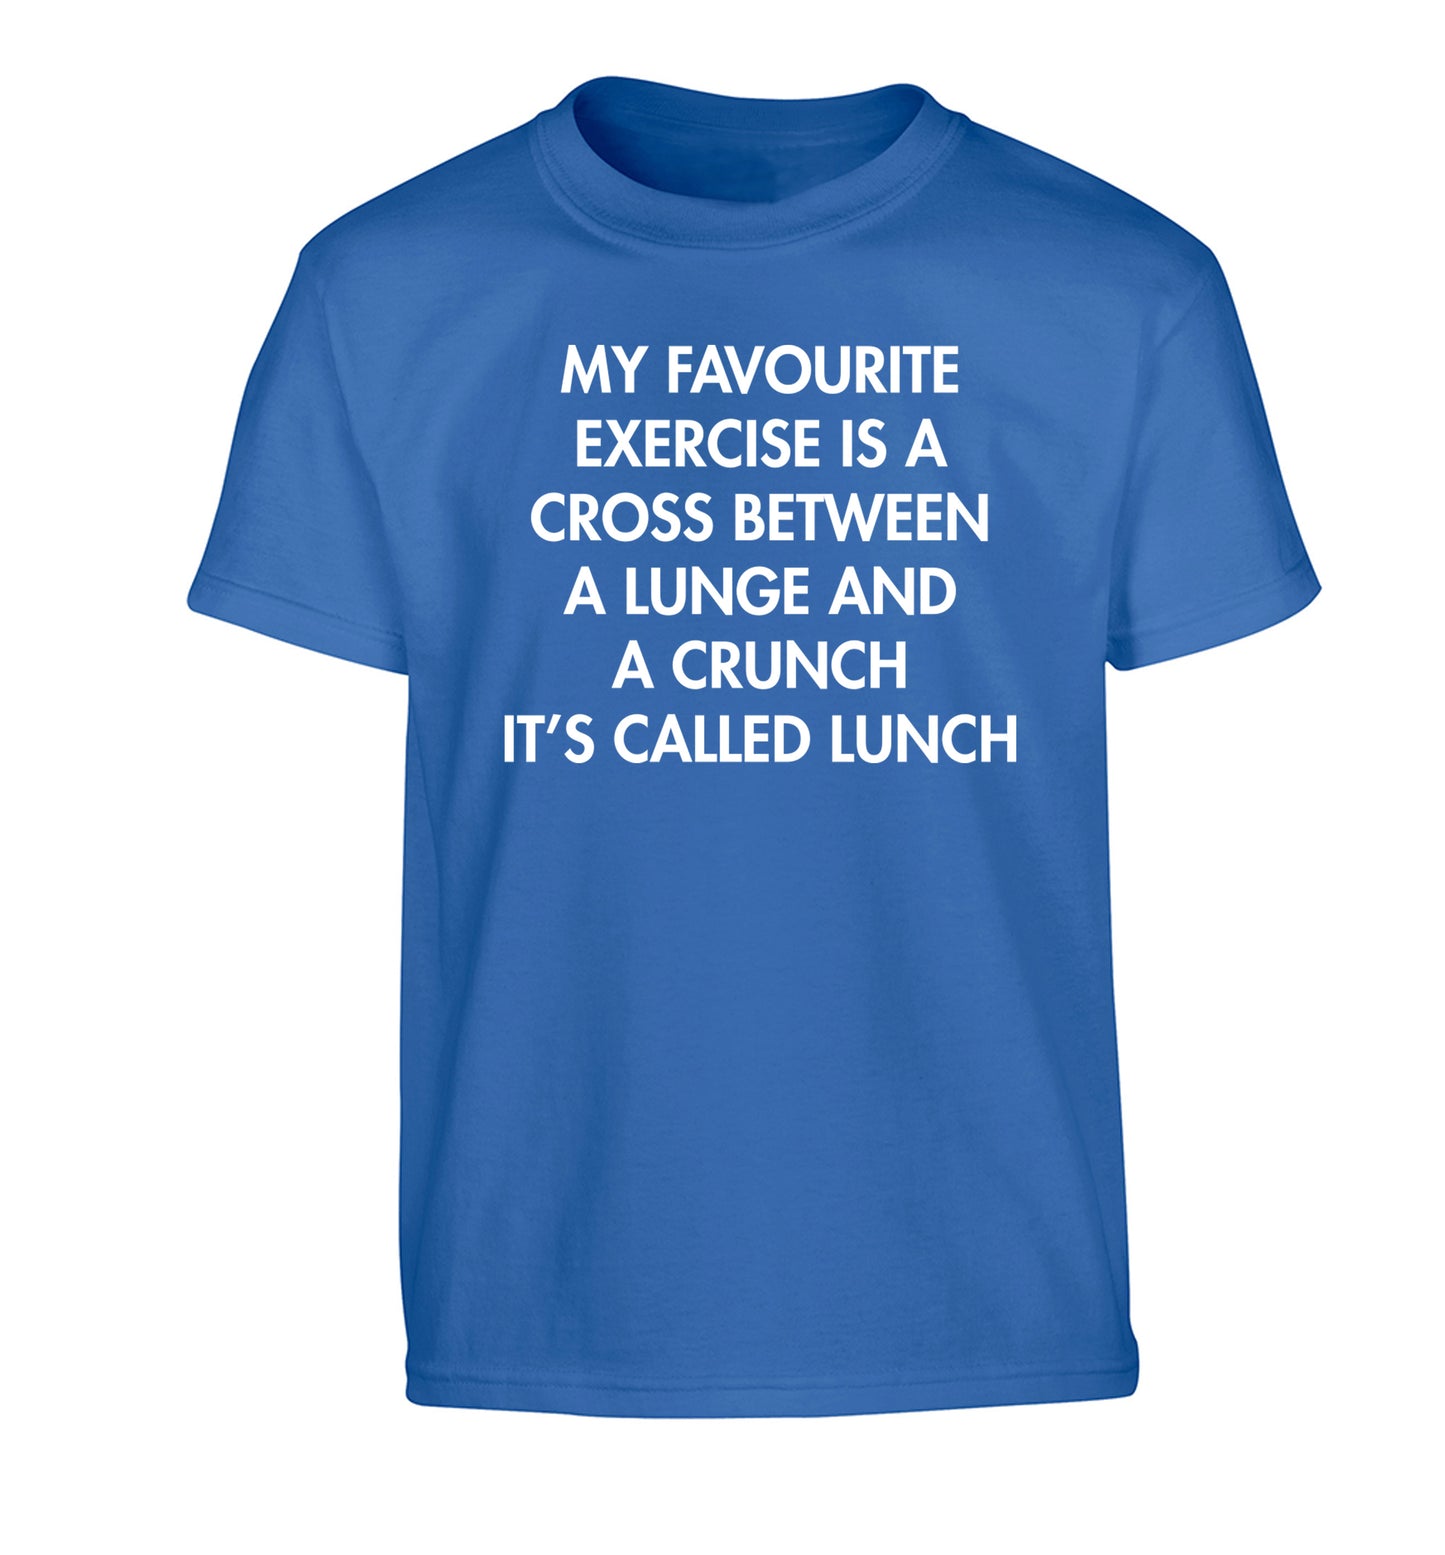 My favourite exercise is a cross between a lung and a crunch it's called lunch Children's blue Tshirt 12-14 Years